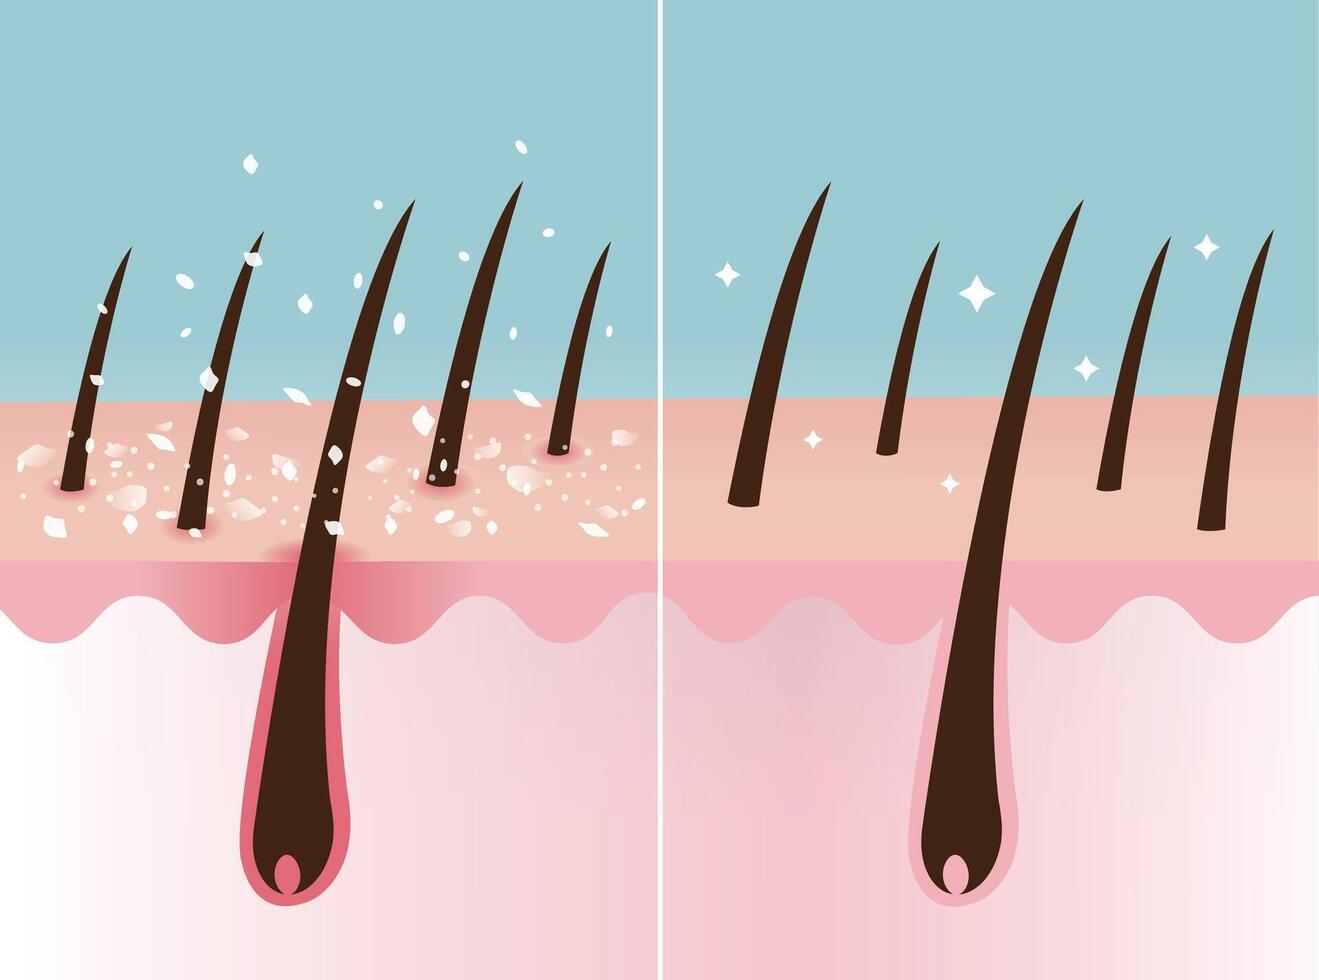 Comparison of dandruff and healthy hair on scalp layer vector illustration. Cross section of scaly scalp, white dry flaky in hair and nourished hair. Hair care and problem concept.